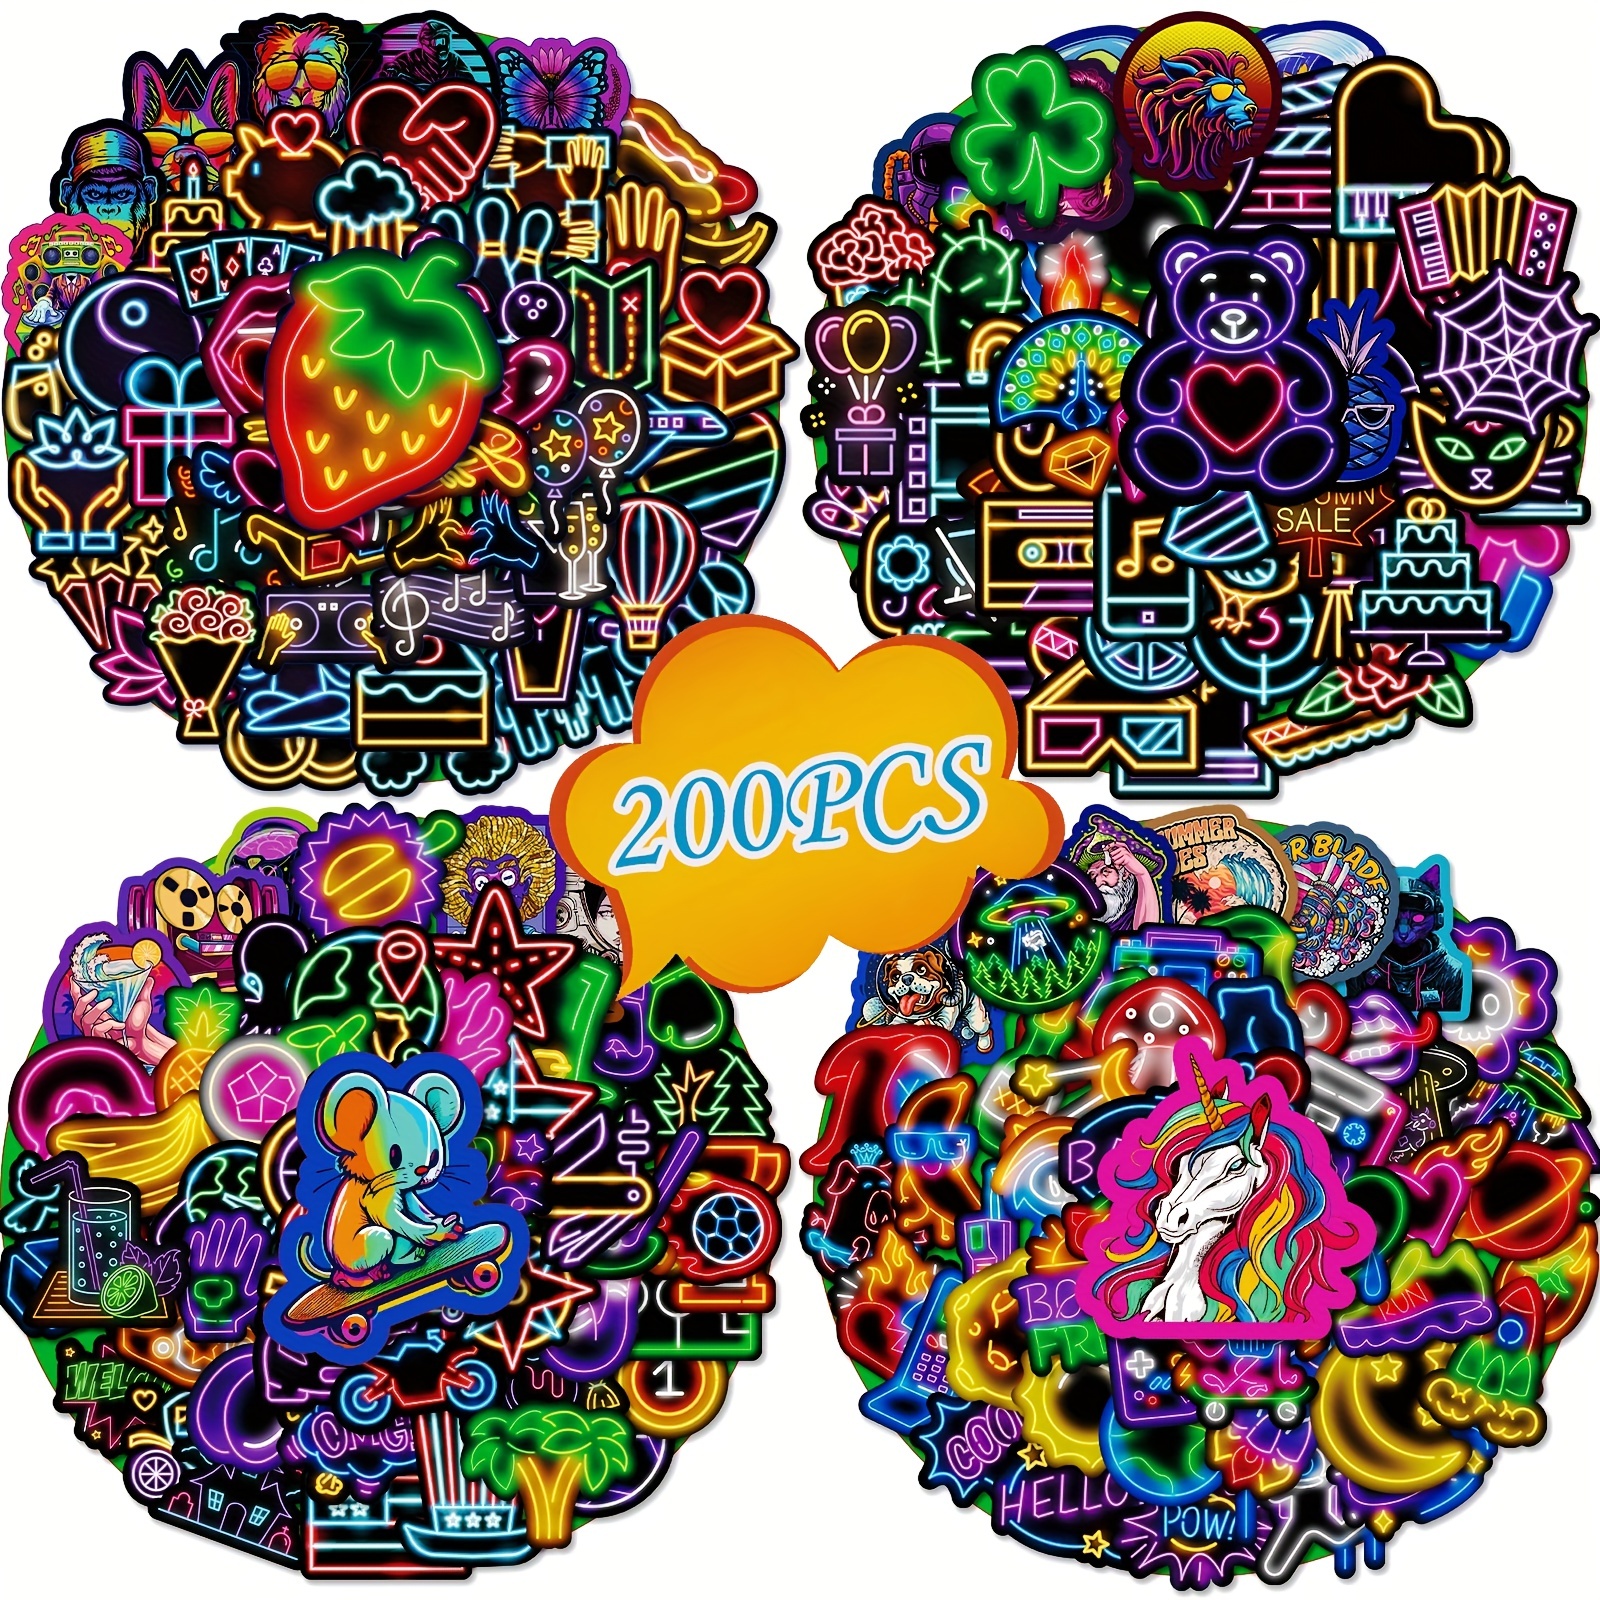 200pcs cool neon graffiti sticker pack water bottle stickers stickers for kids teens adults vinyl waterproof fun stickers for laptop phone scrapbook luggage skate computer decals 0